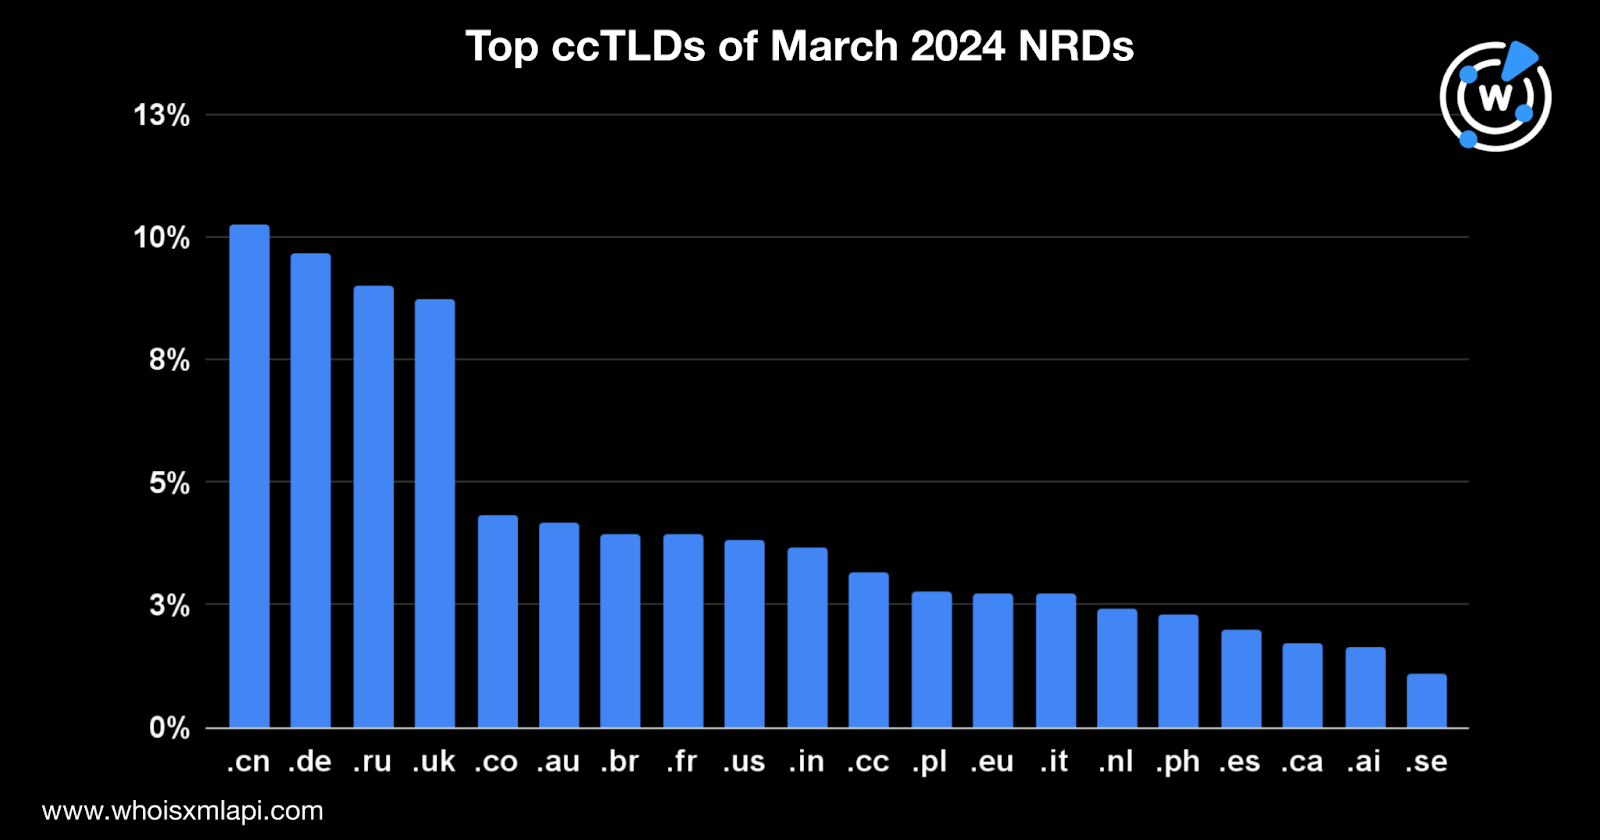 TopccTLDs of March 2024 NRDs